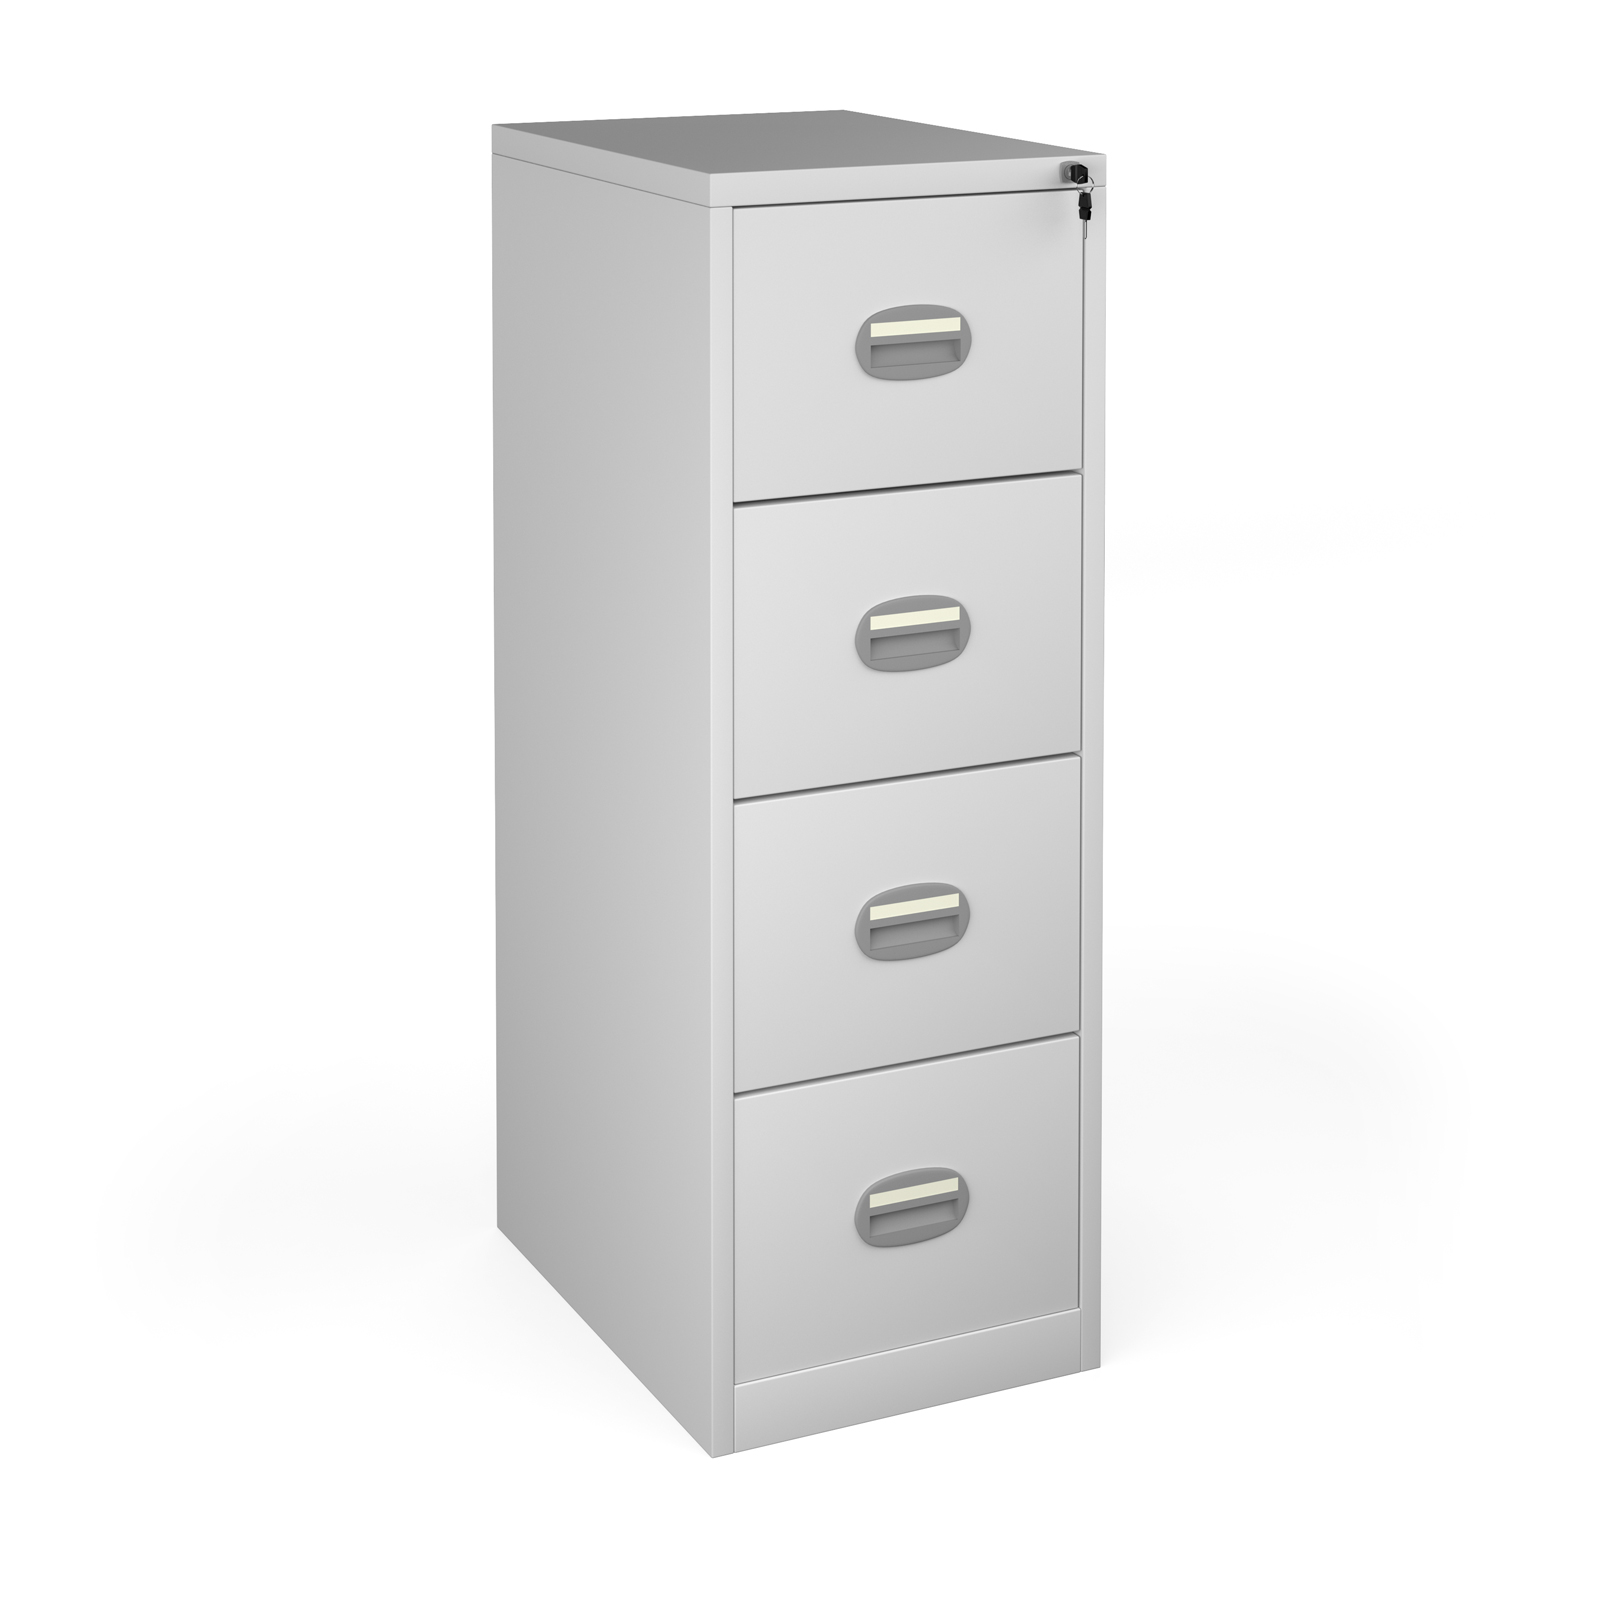 Filing Cabinets Steel 4 drawer contract filing cabinet 1320mm high - light grey